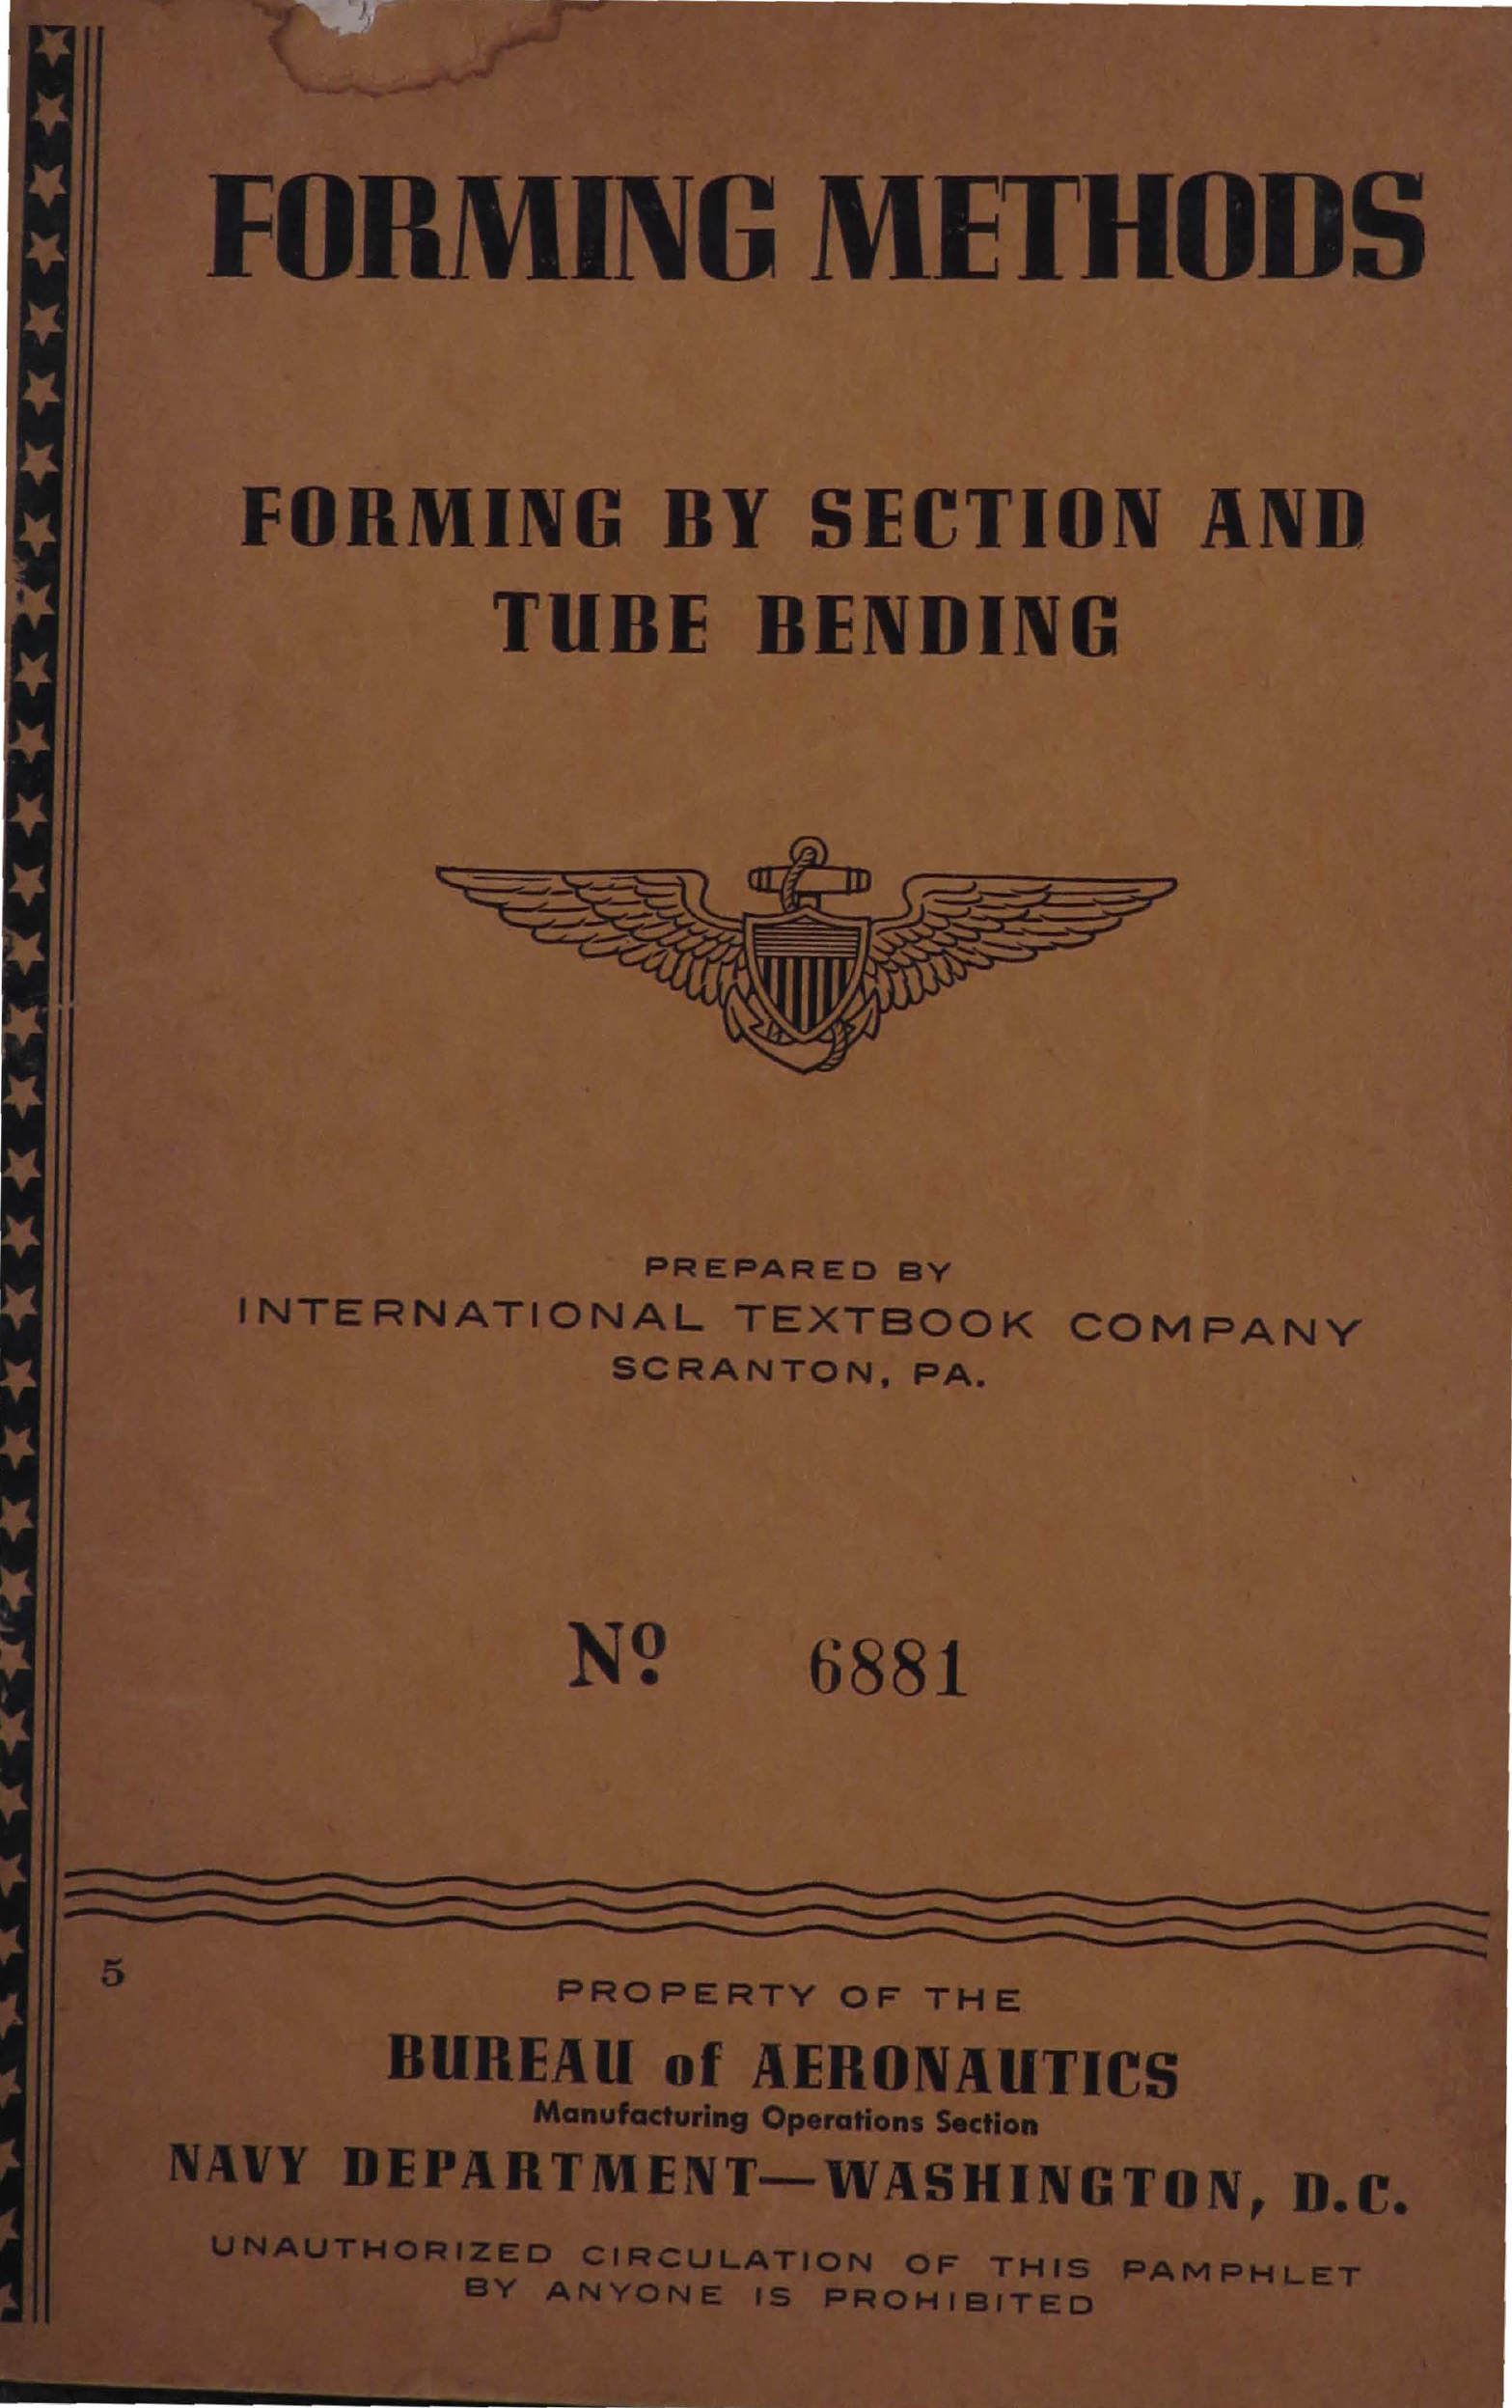 Sample page 1 from AirCorps Library document: Forming Methods - Forming by Section and Tube Bending - Bureau of Aeronautics